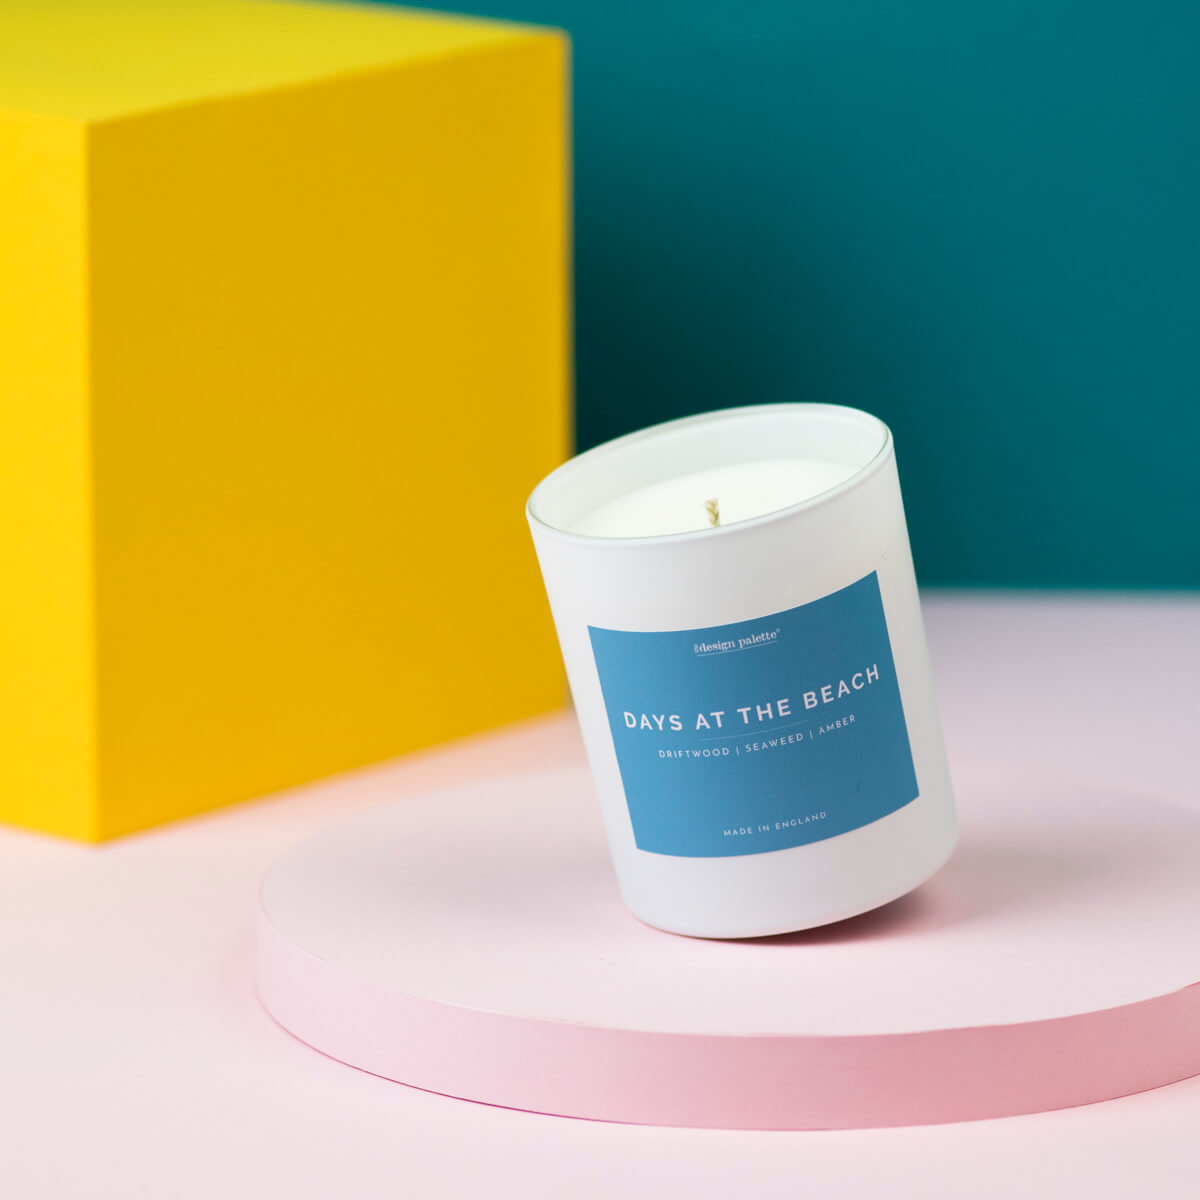 Days at the Beach Candle - The Design Palette